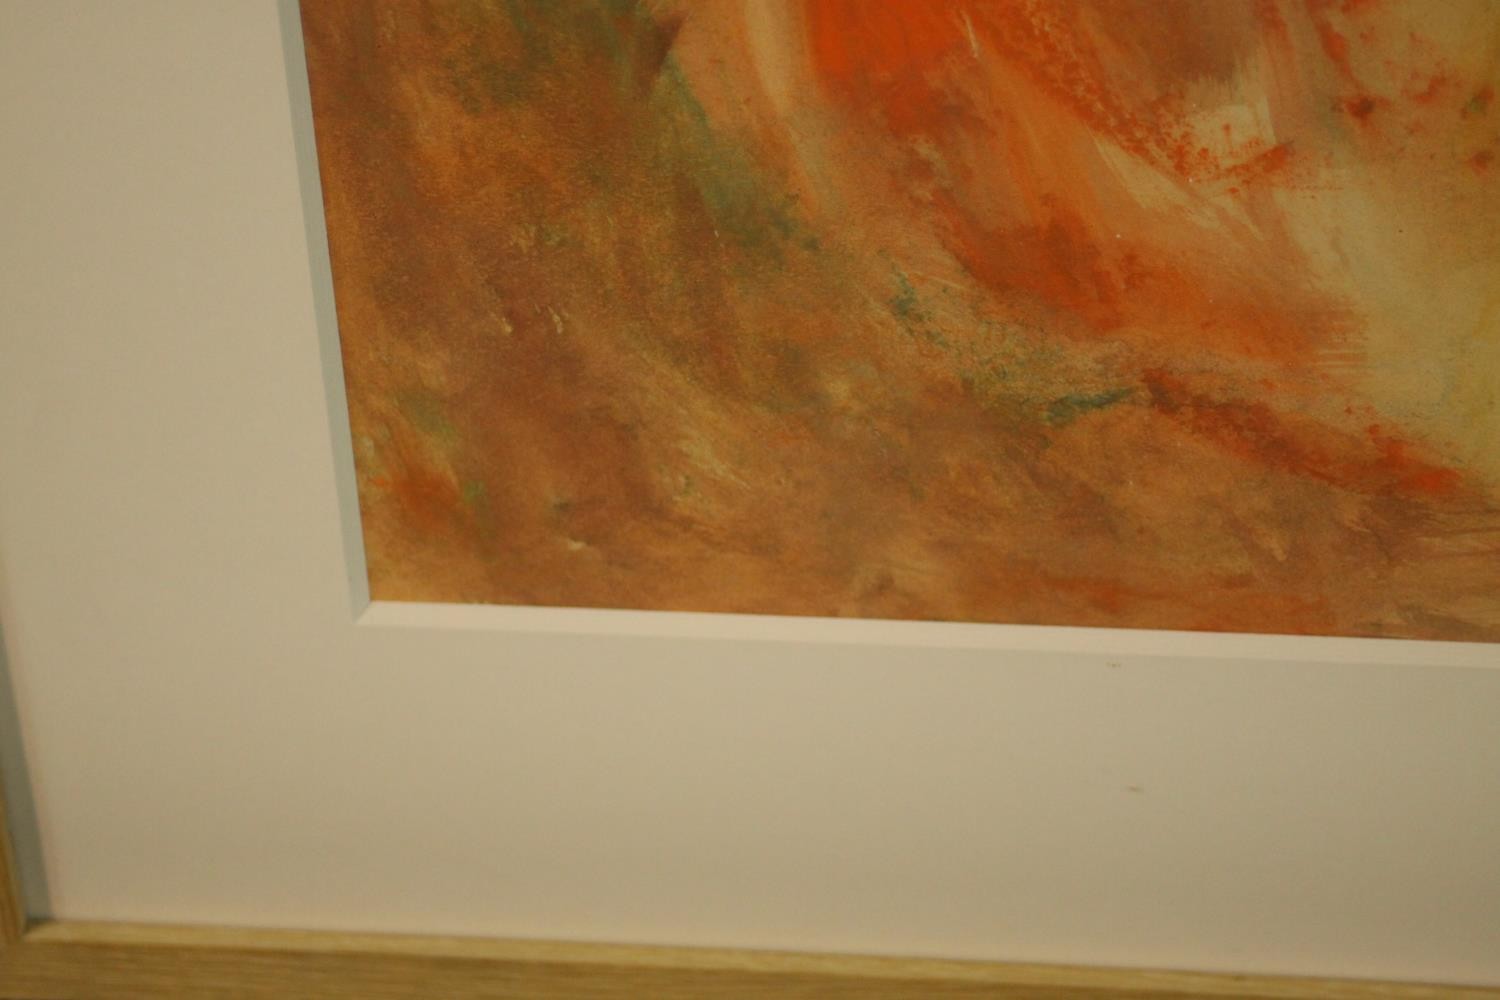 Kate Nicholson (1929 - 2019), ‘Untitled' (Coastal Light)’ in ochre, orange and brown, gouache on - Image 5 of 7